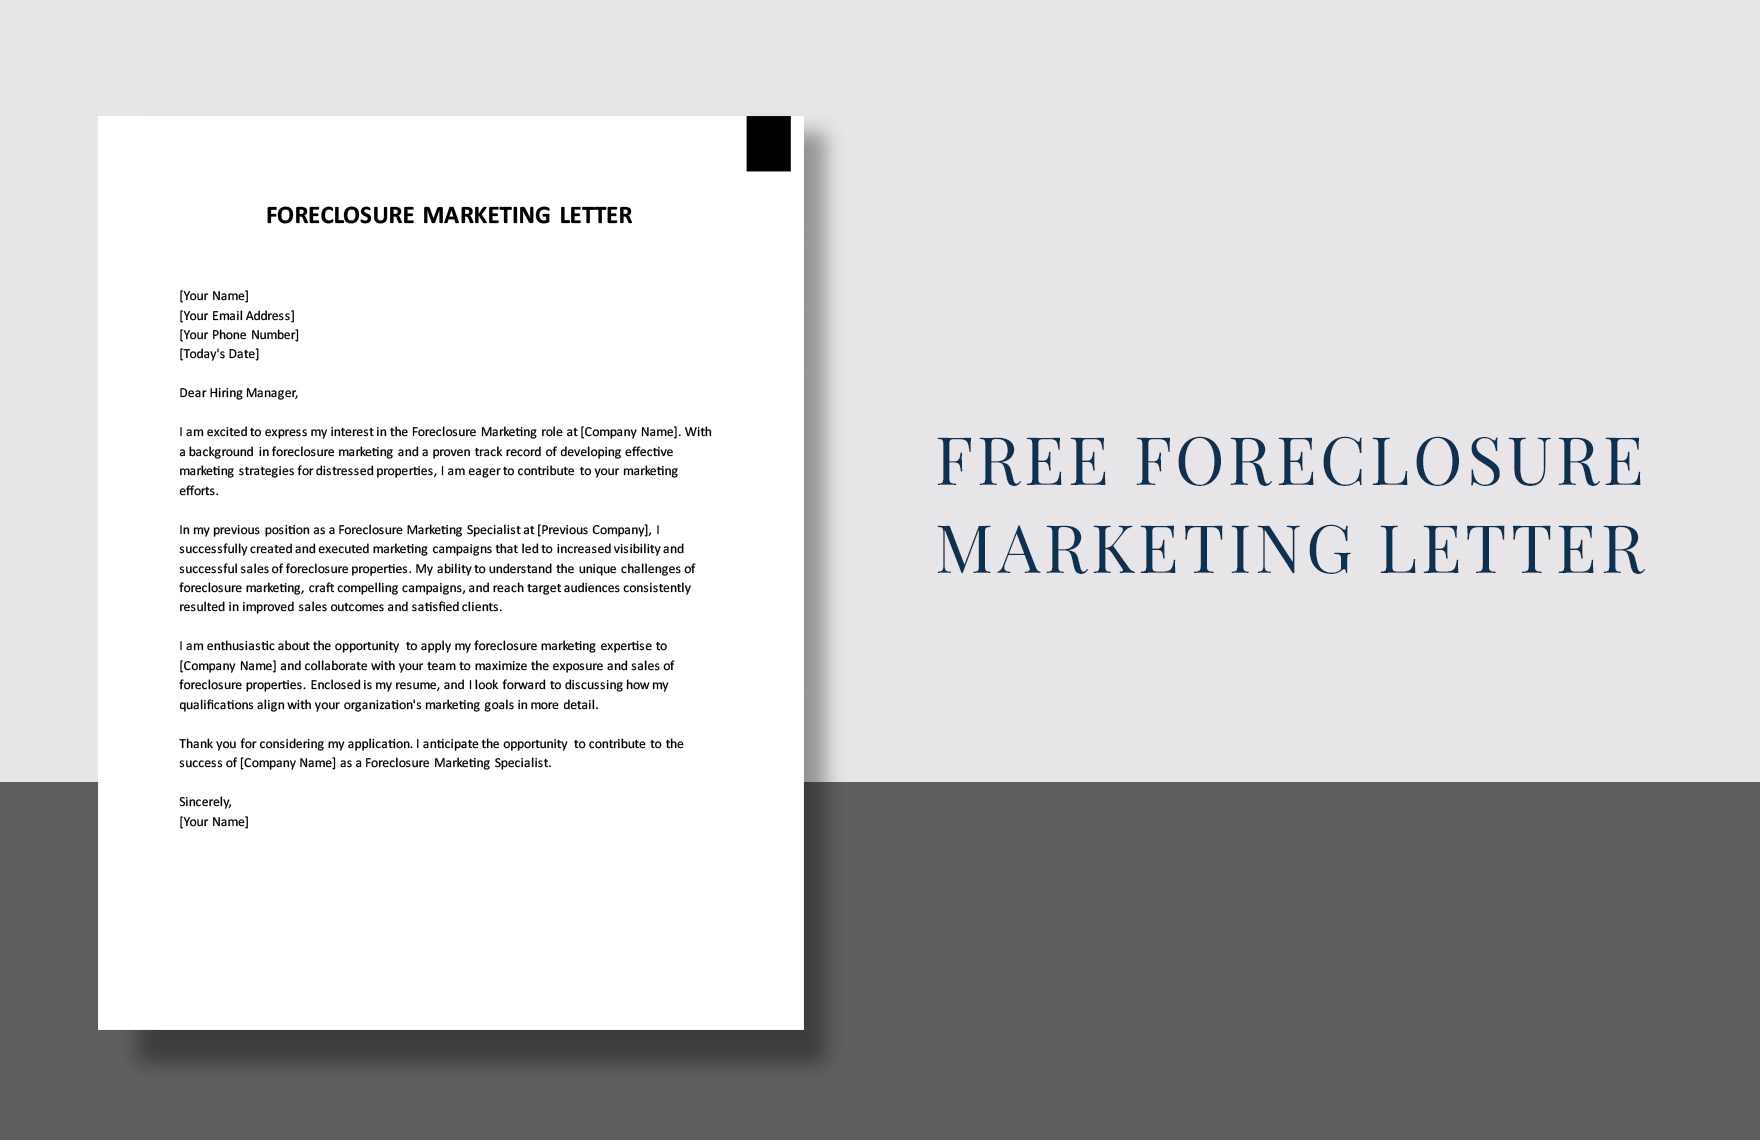 Foreclosure Marketing Letter